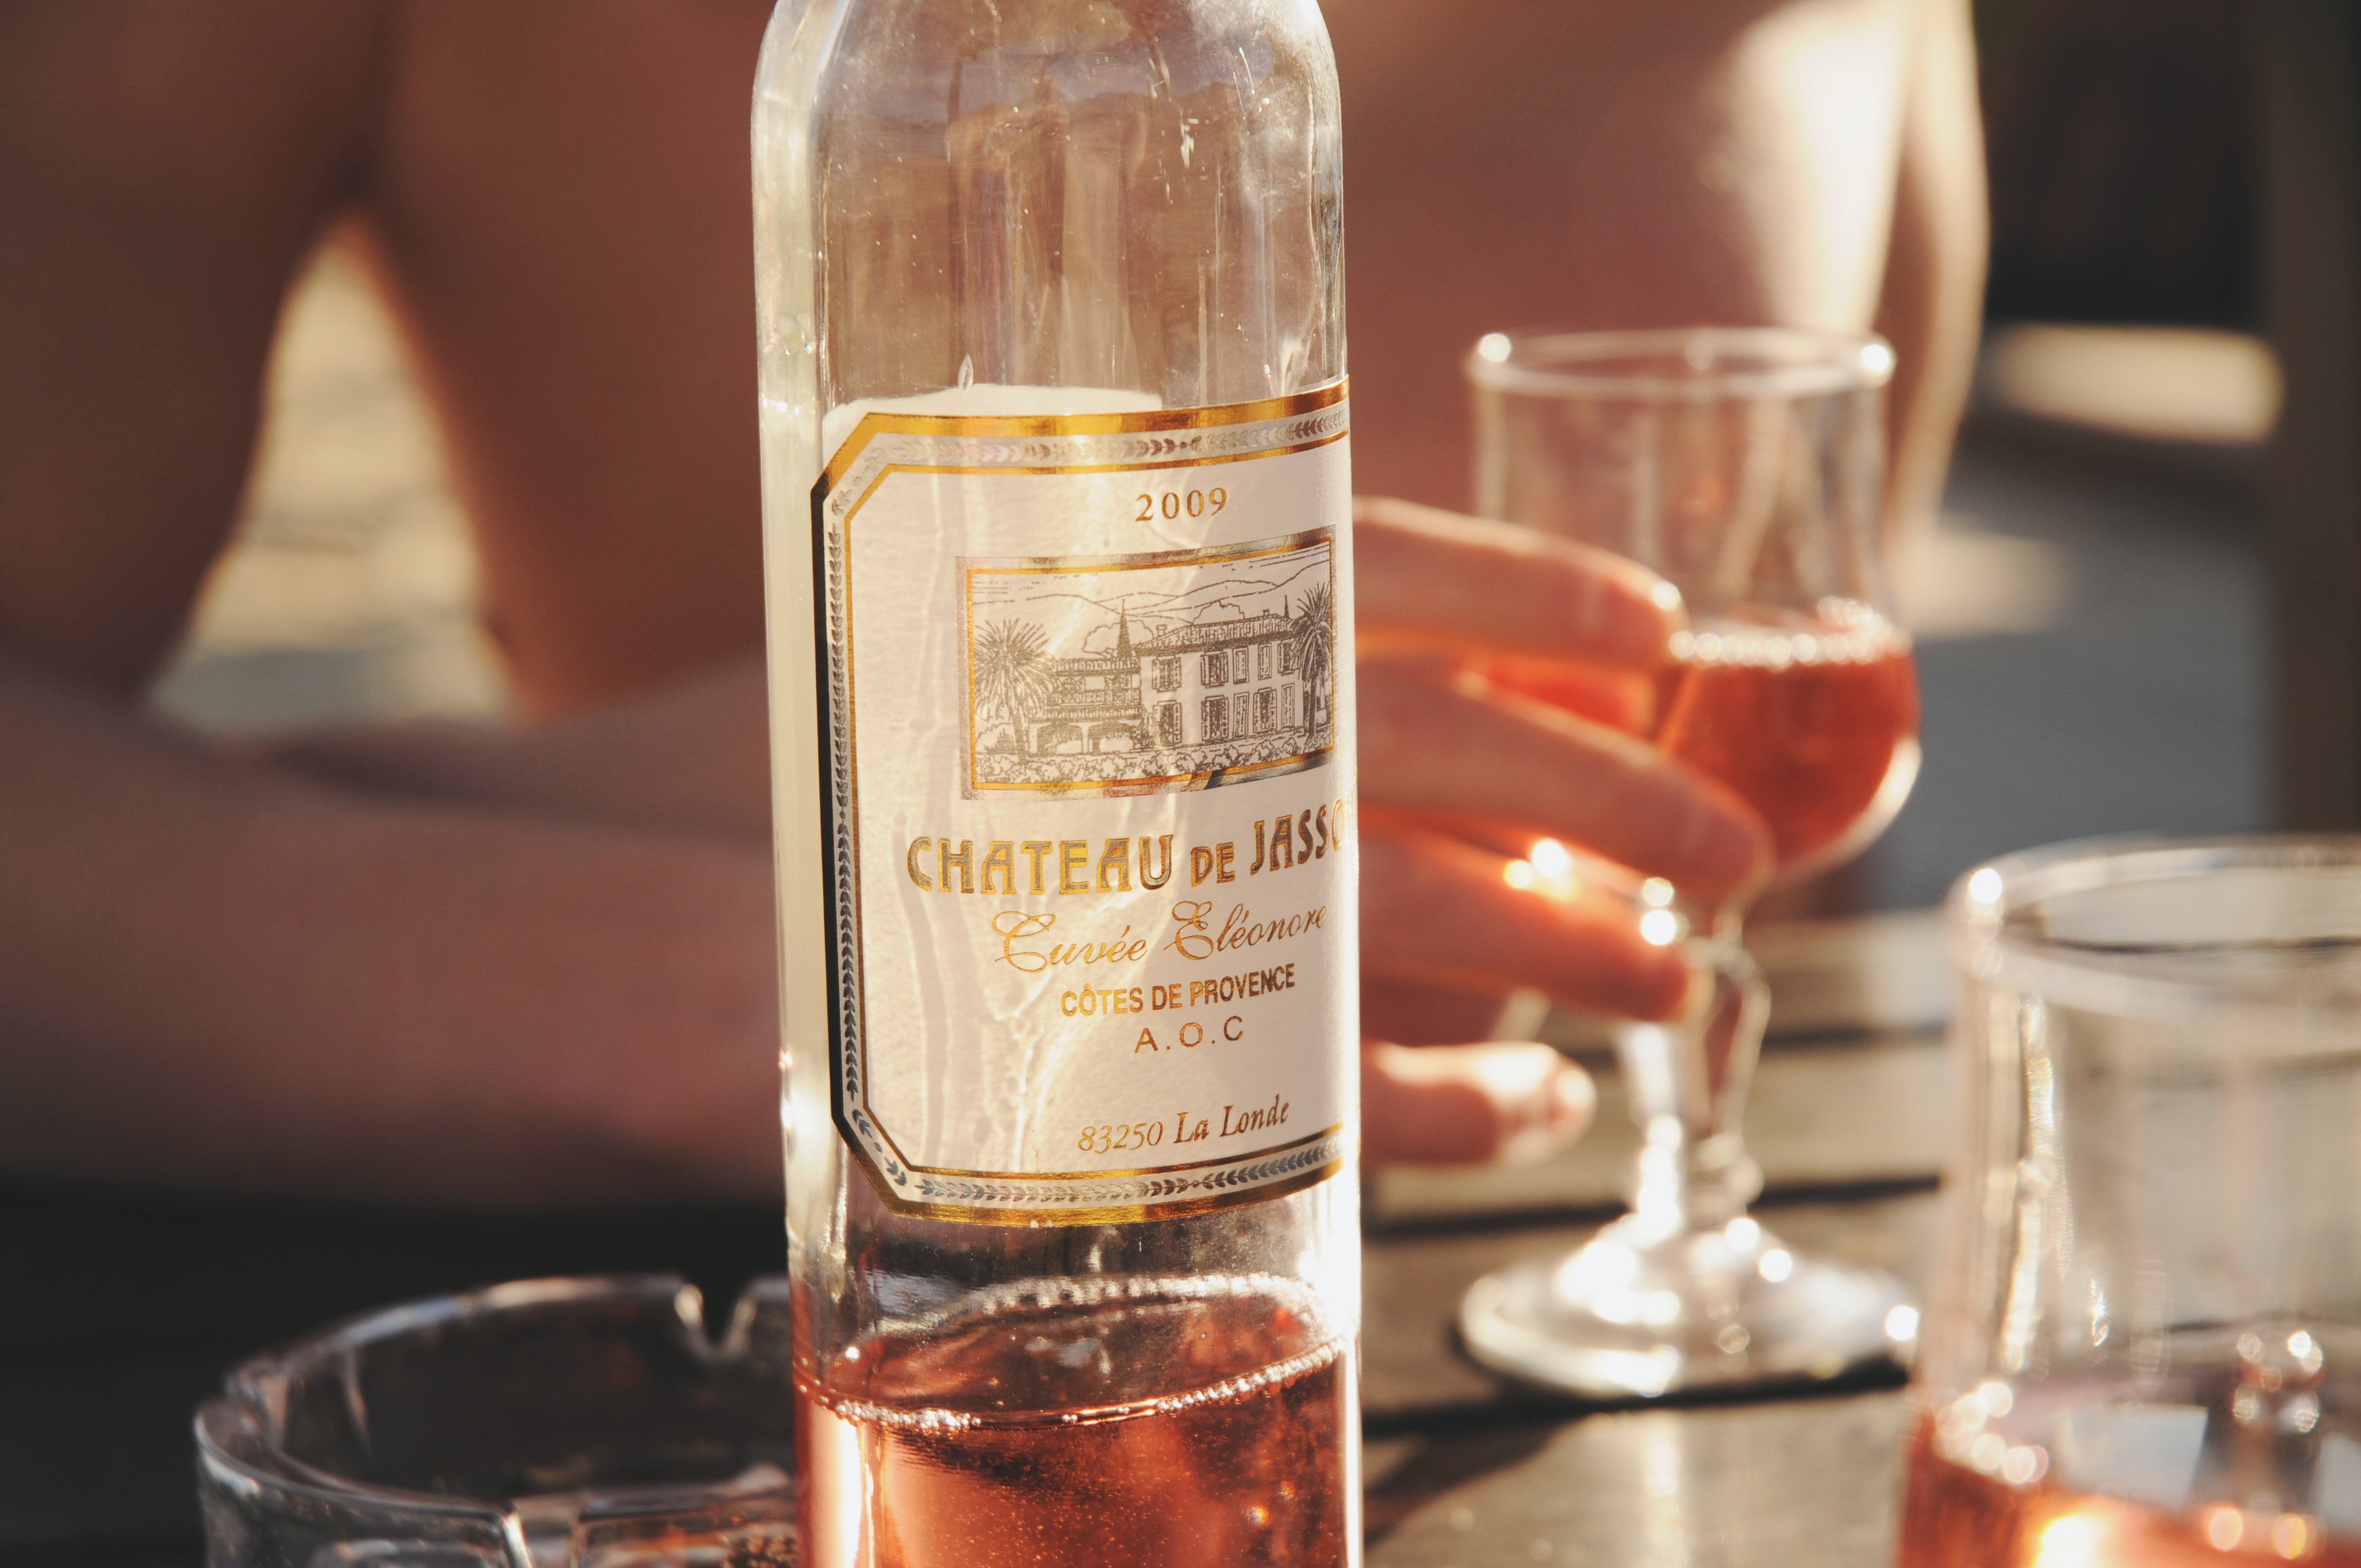 A bottle of rose wine on a table